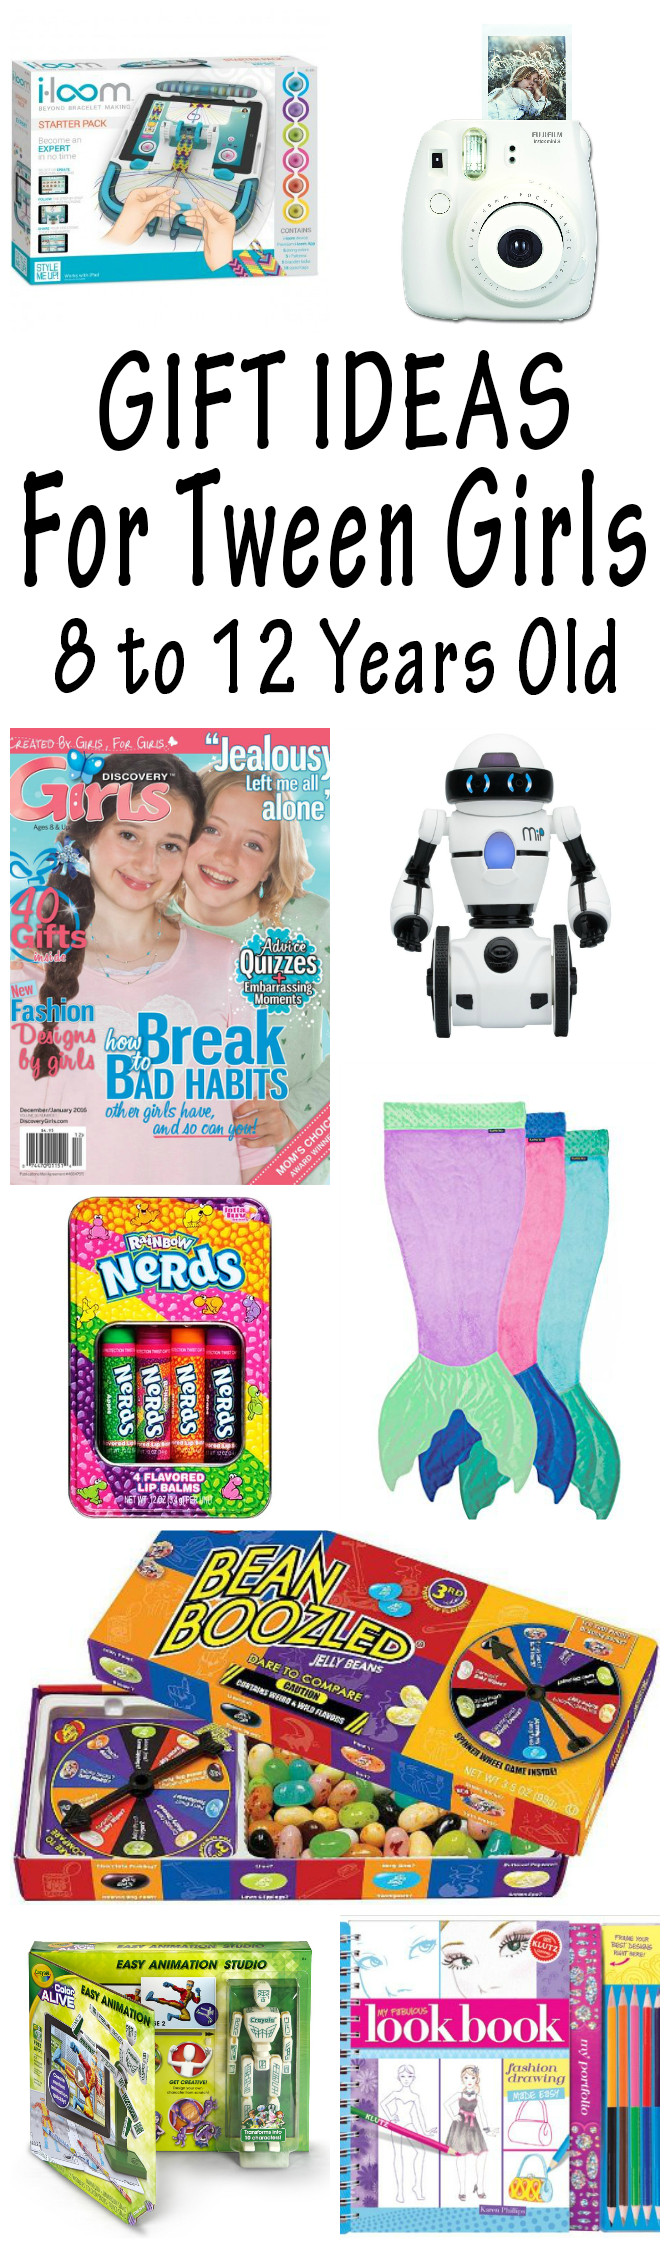 Birthday Return Gift Ideas For 8 Year Old
 Gift Ideas For Tween Girls They Will Love 2017 Christmas